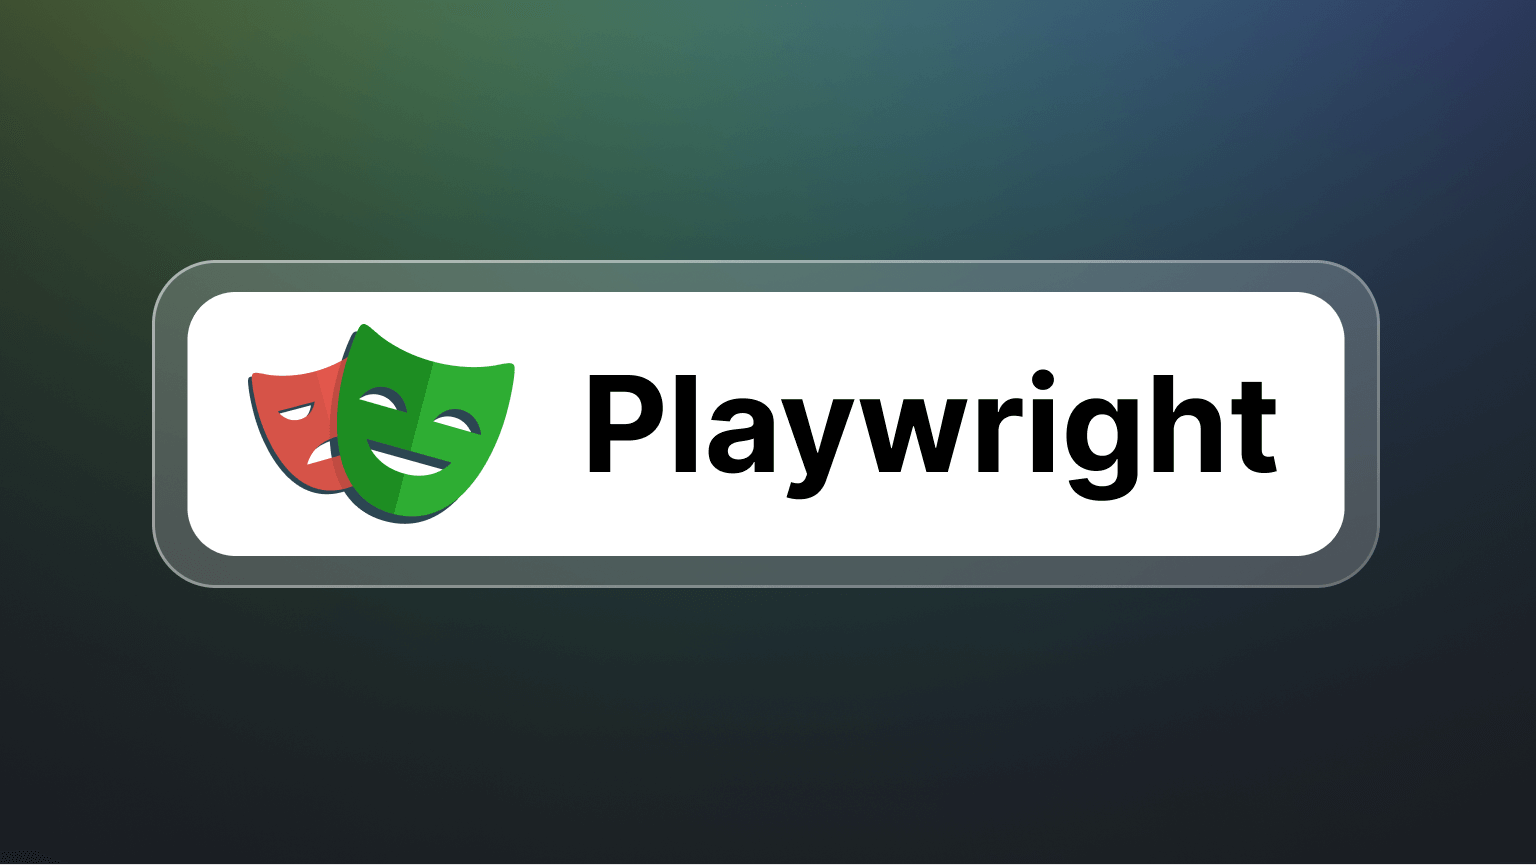 Playwright web scraping - tutorial on how to scrape the web with Playwright